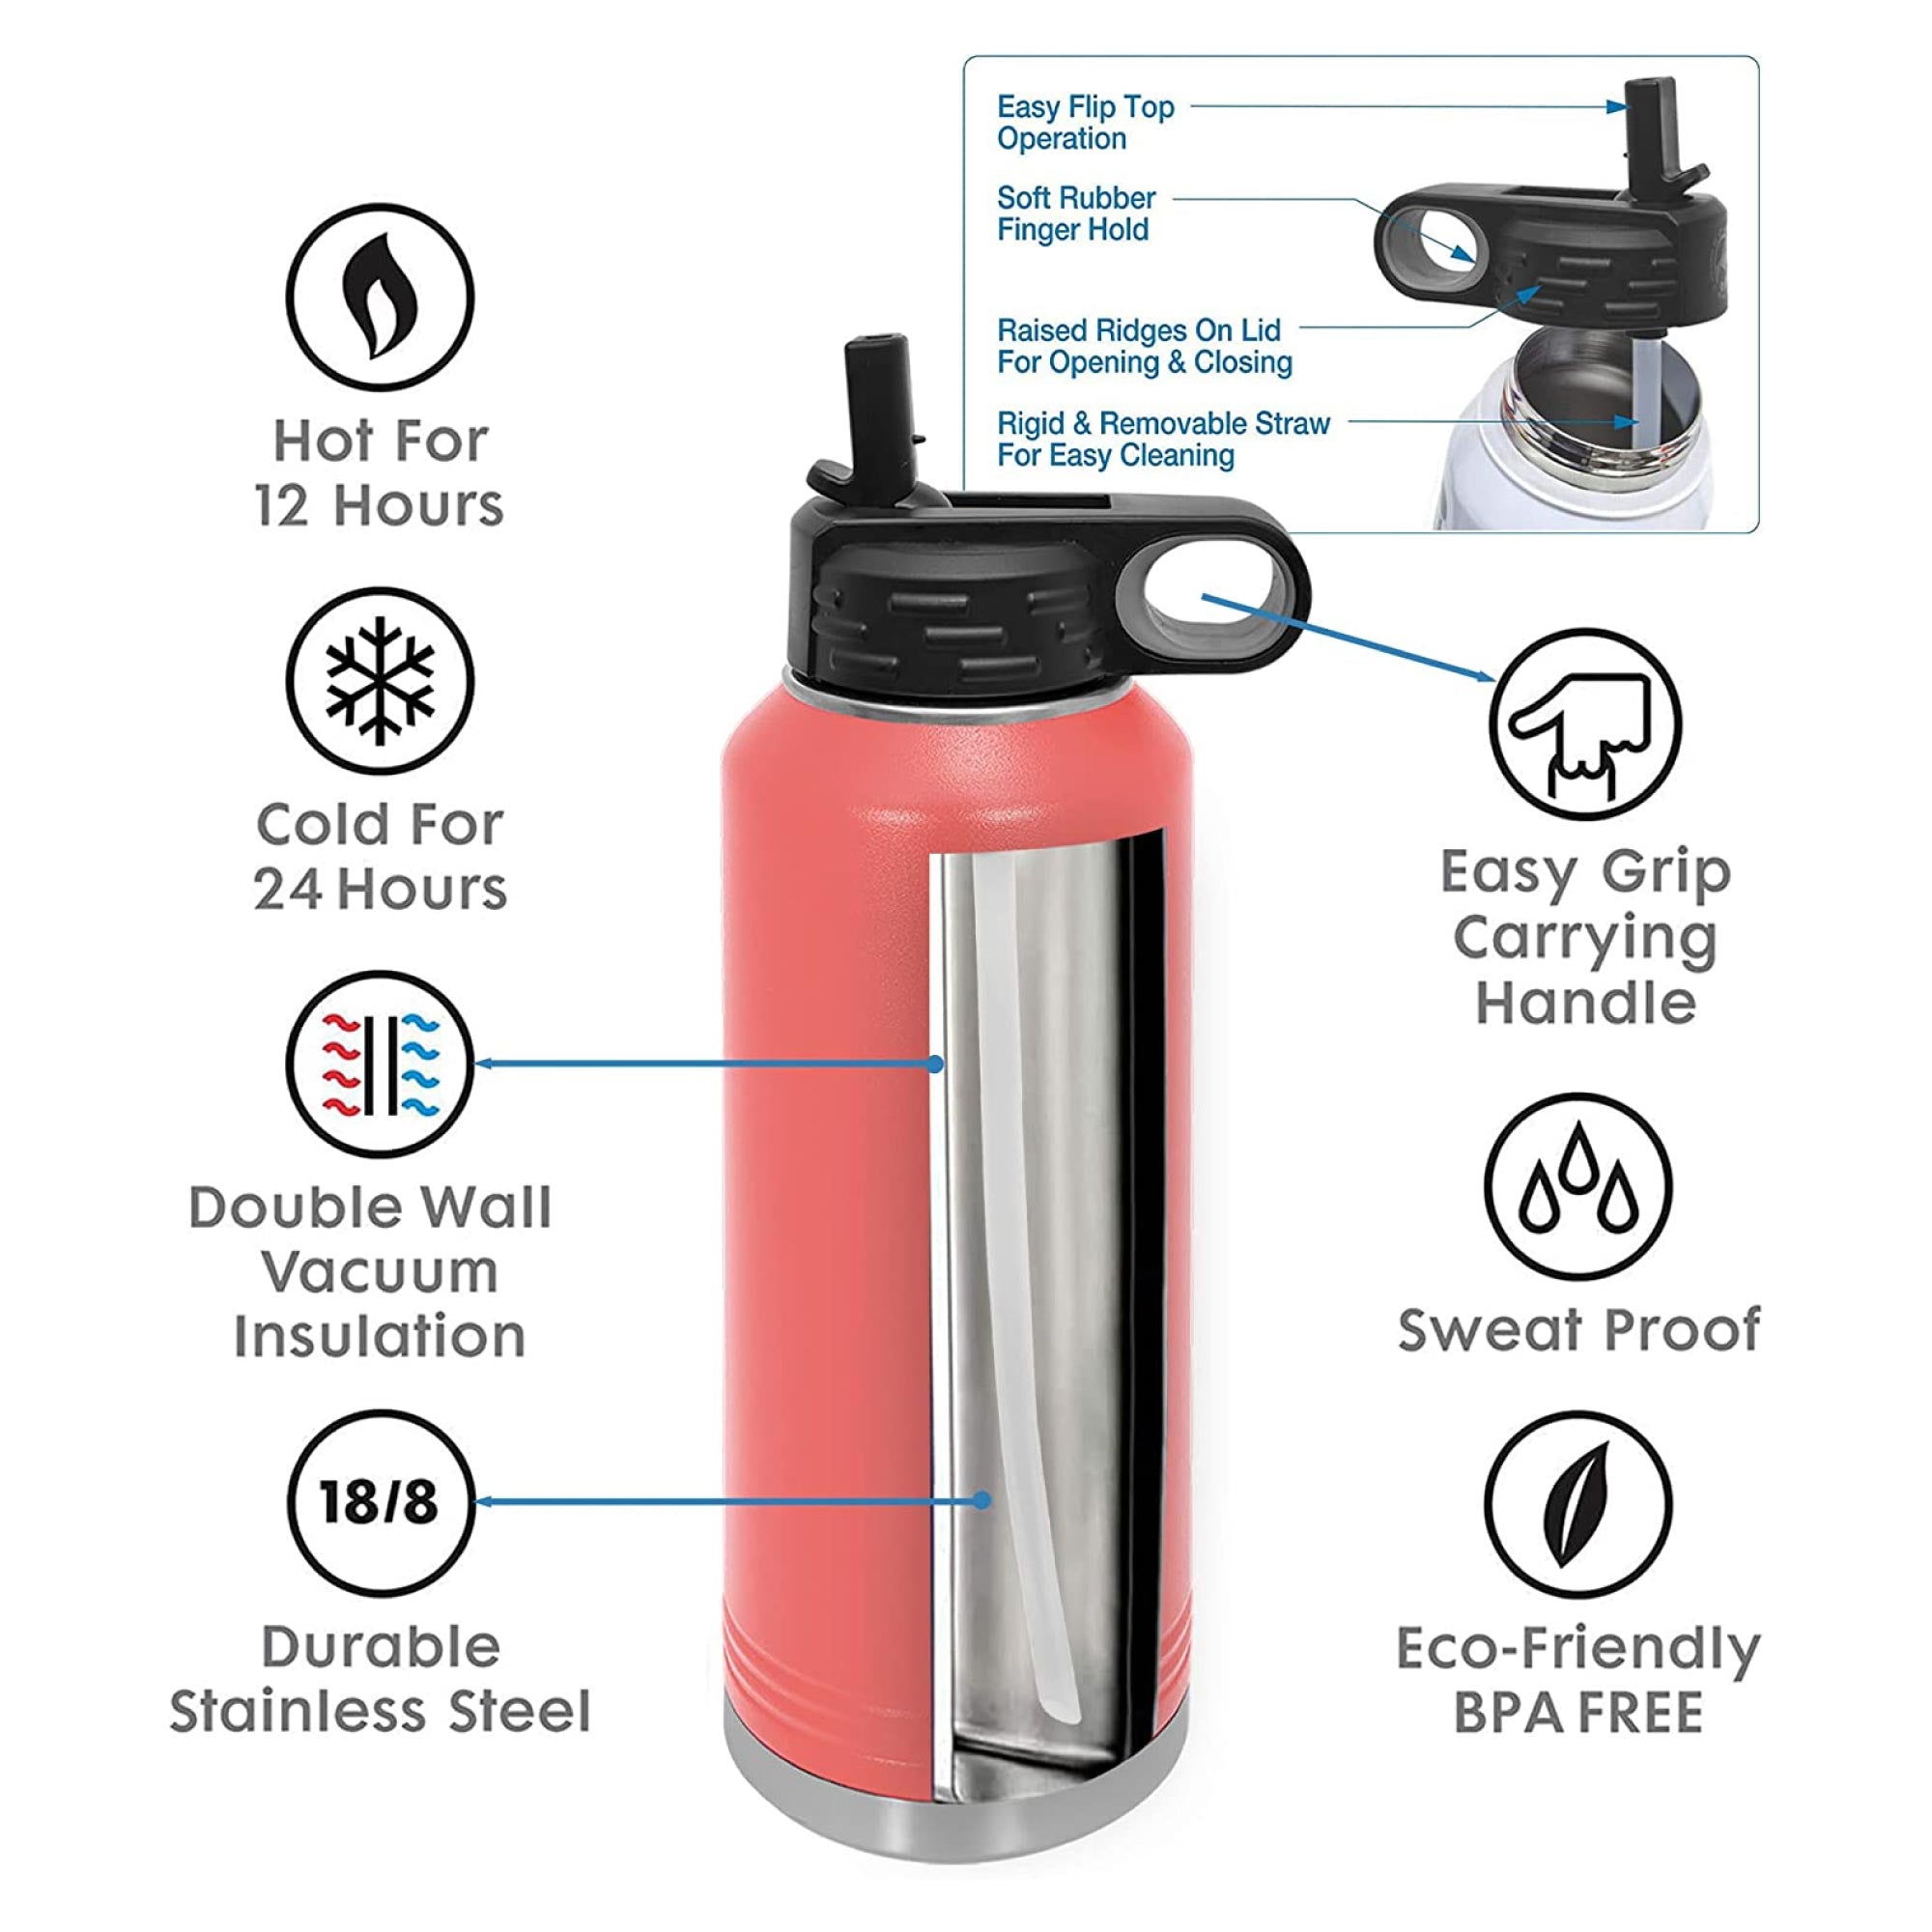 Promotional 24 oz. Unity Stainless Steel Water Bottle